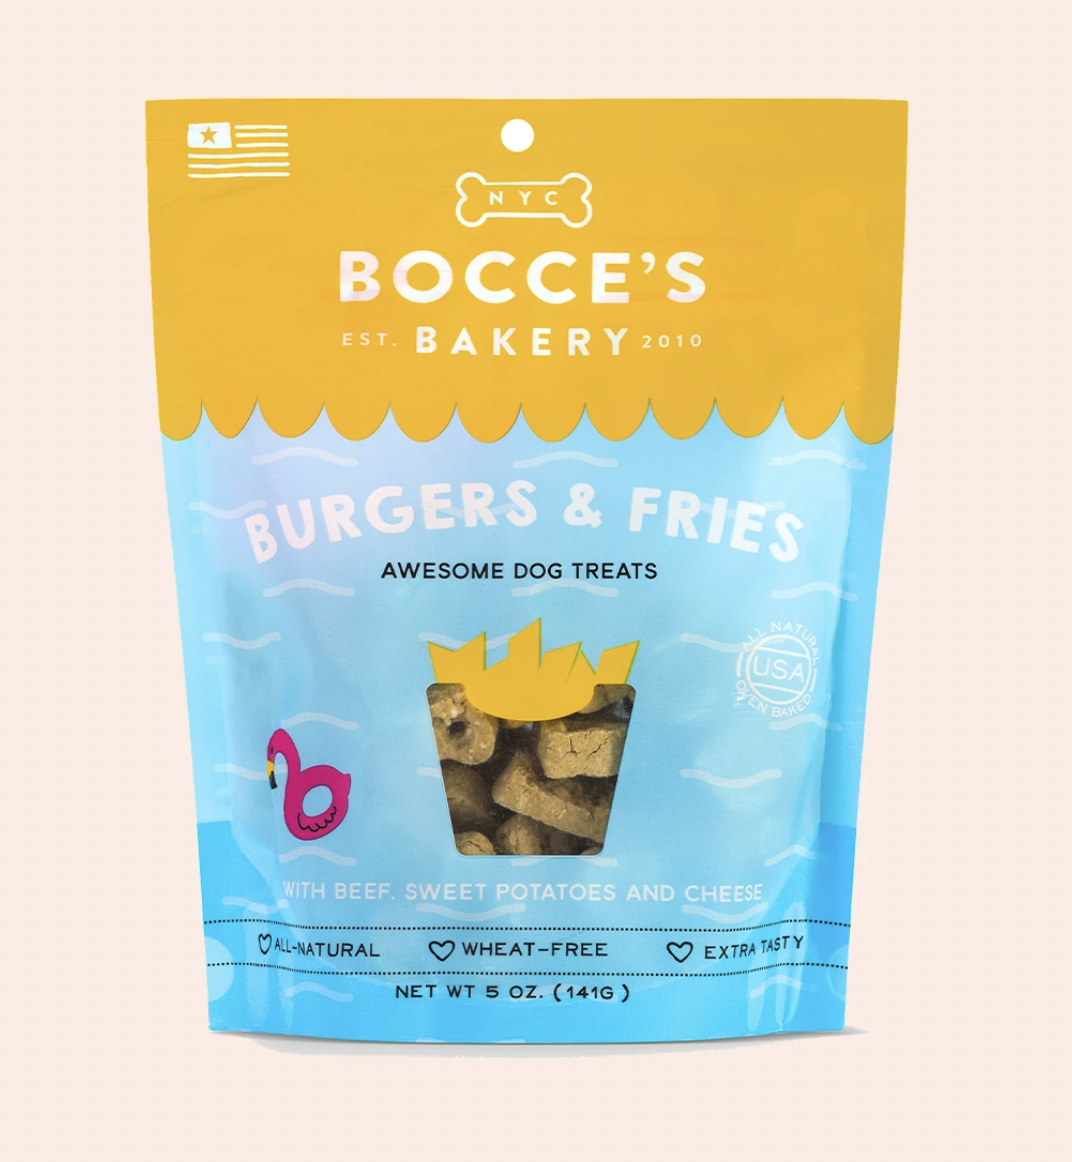 Burgers & Fries - BOCCE'S